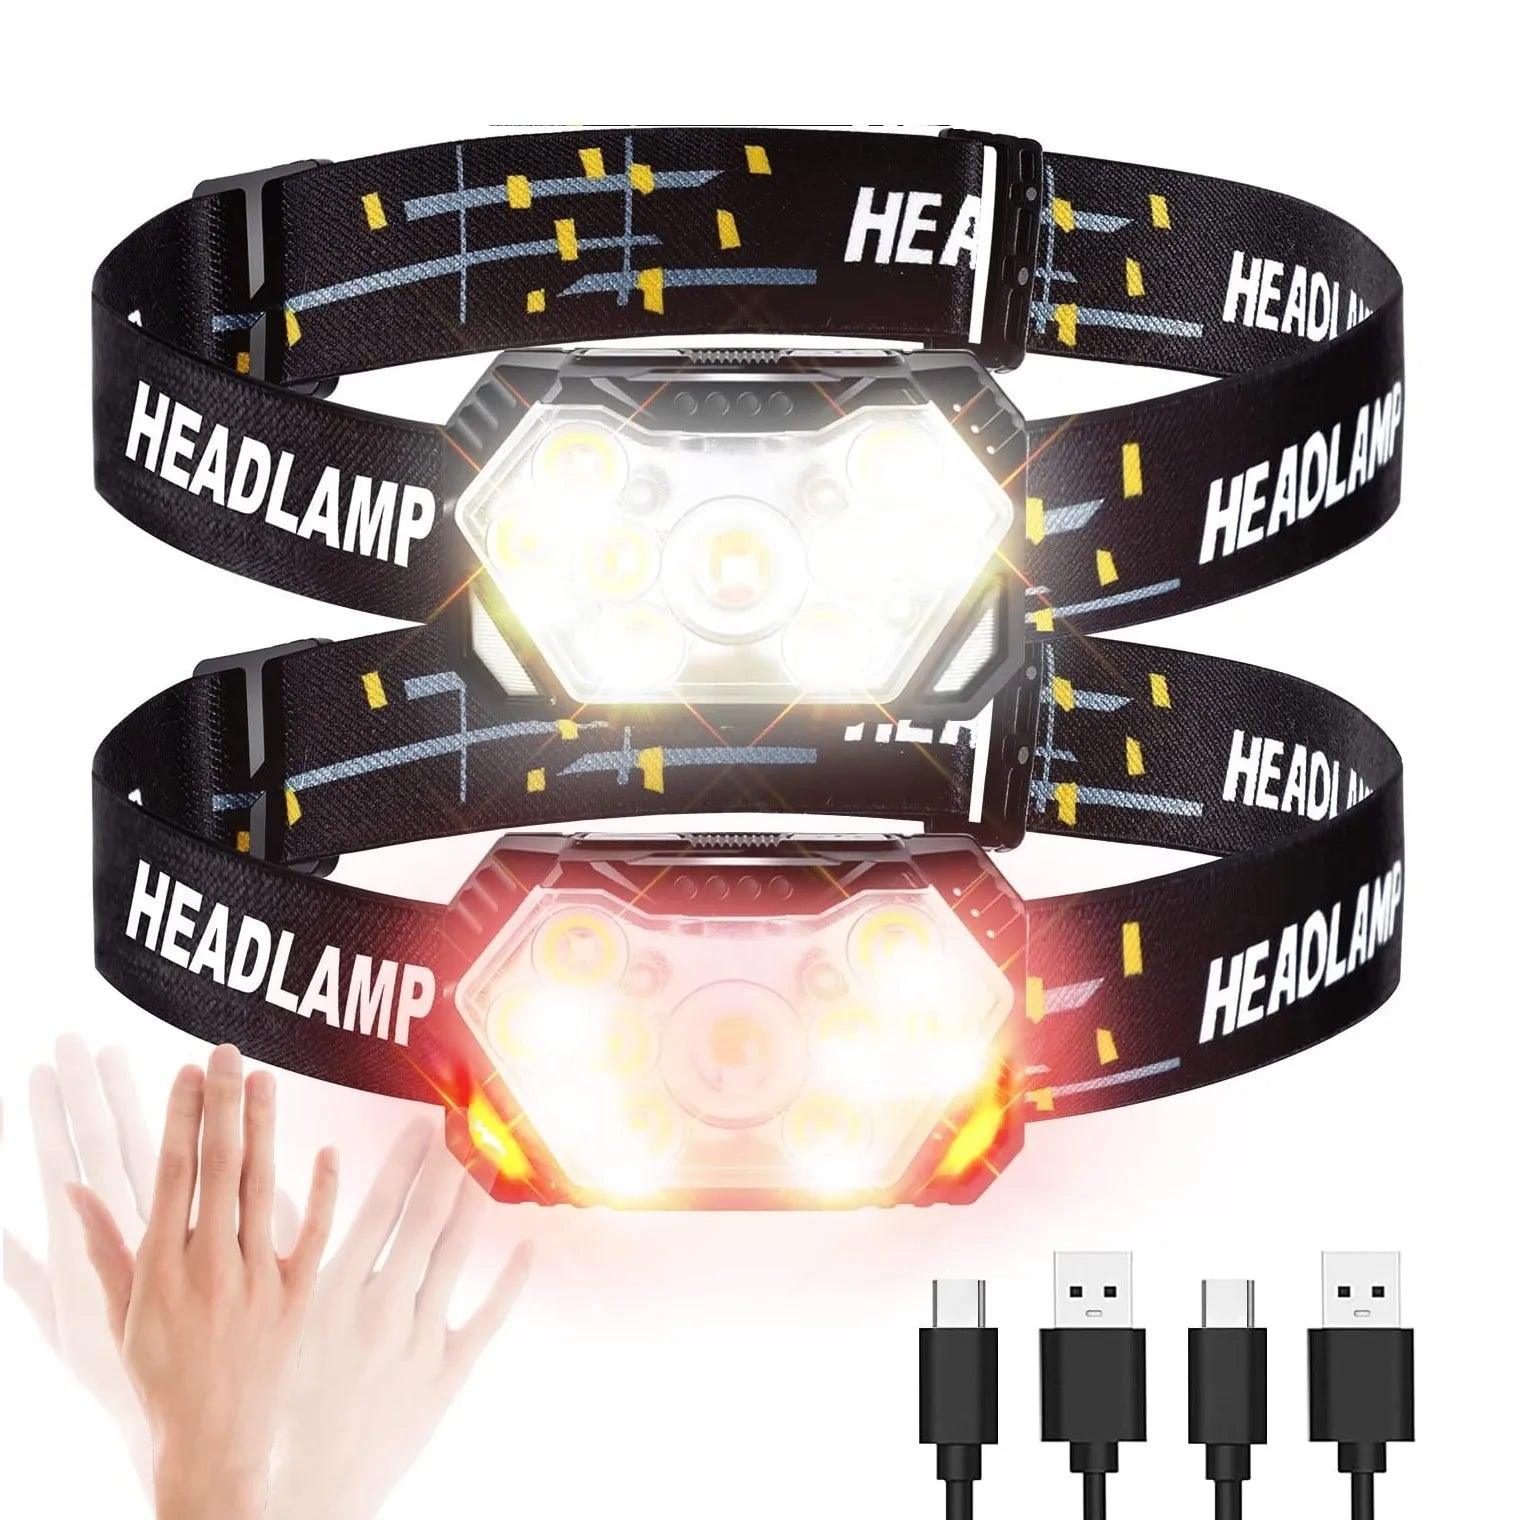 Super Bright 9 LED Rechargeable Headlamp with Motion Sensor - Outdoor Camping Fishing Work Flashlight  ourlum.com   